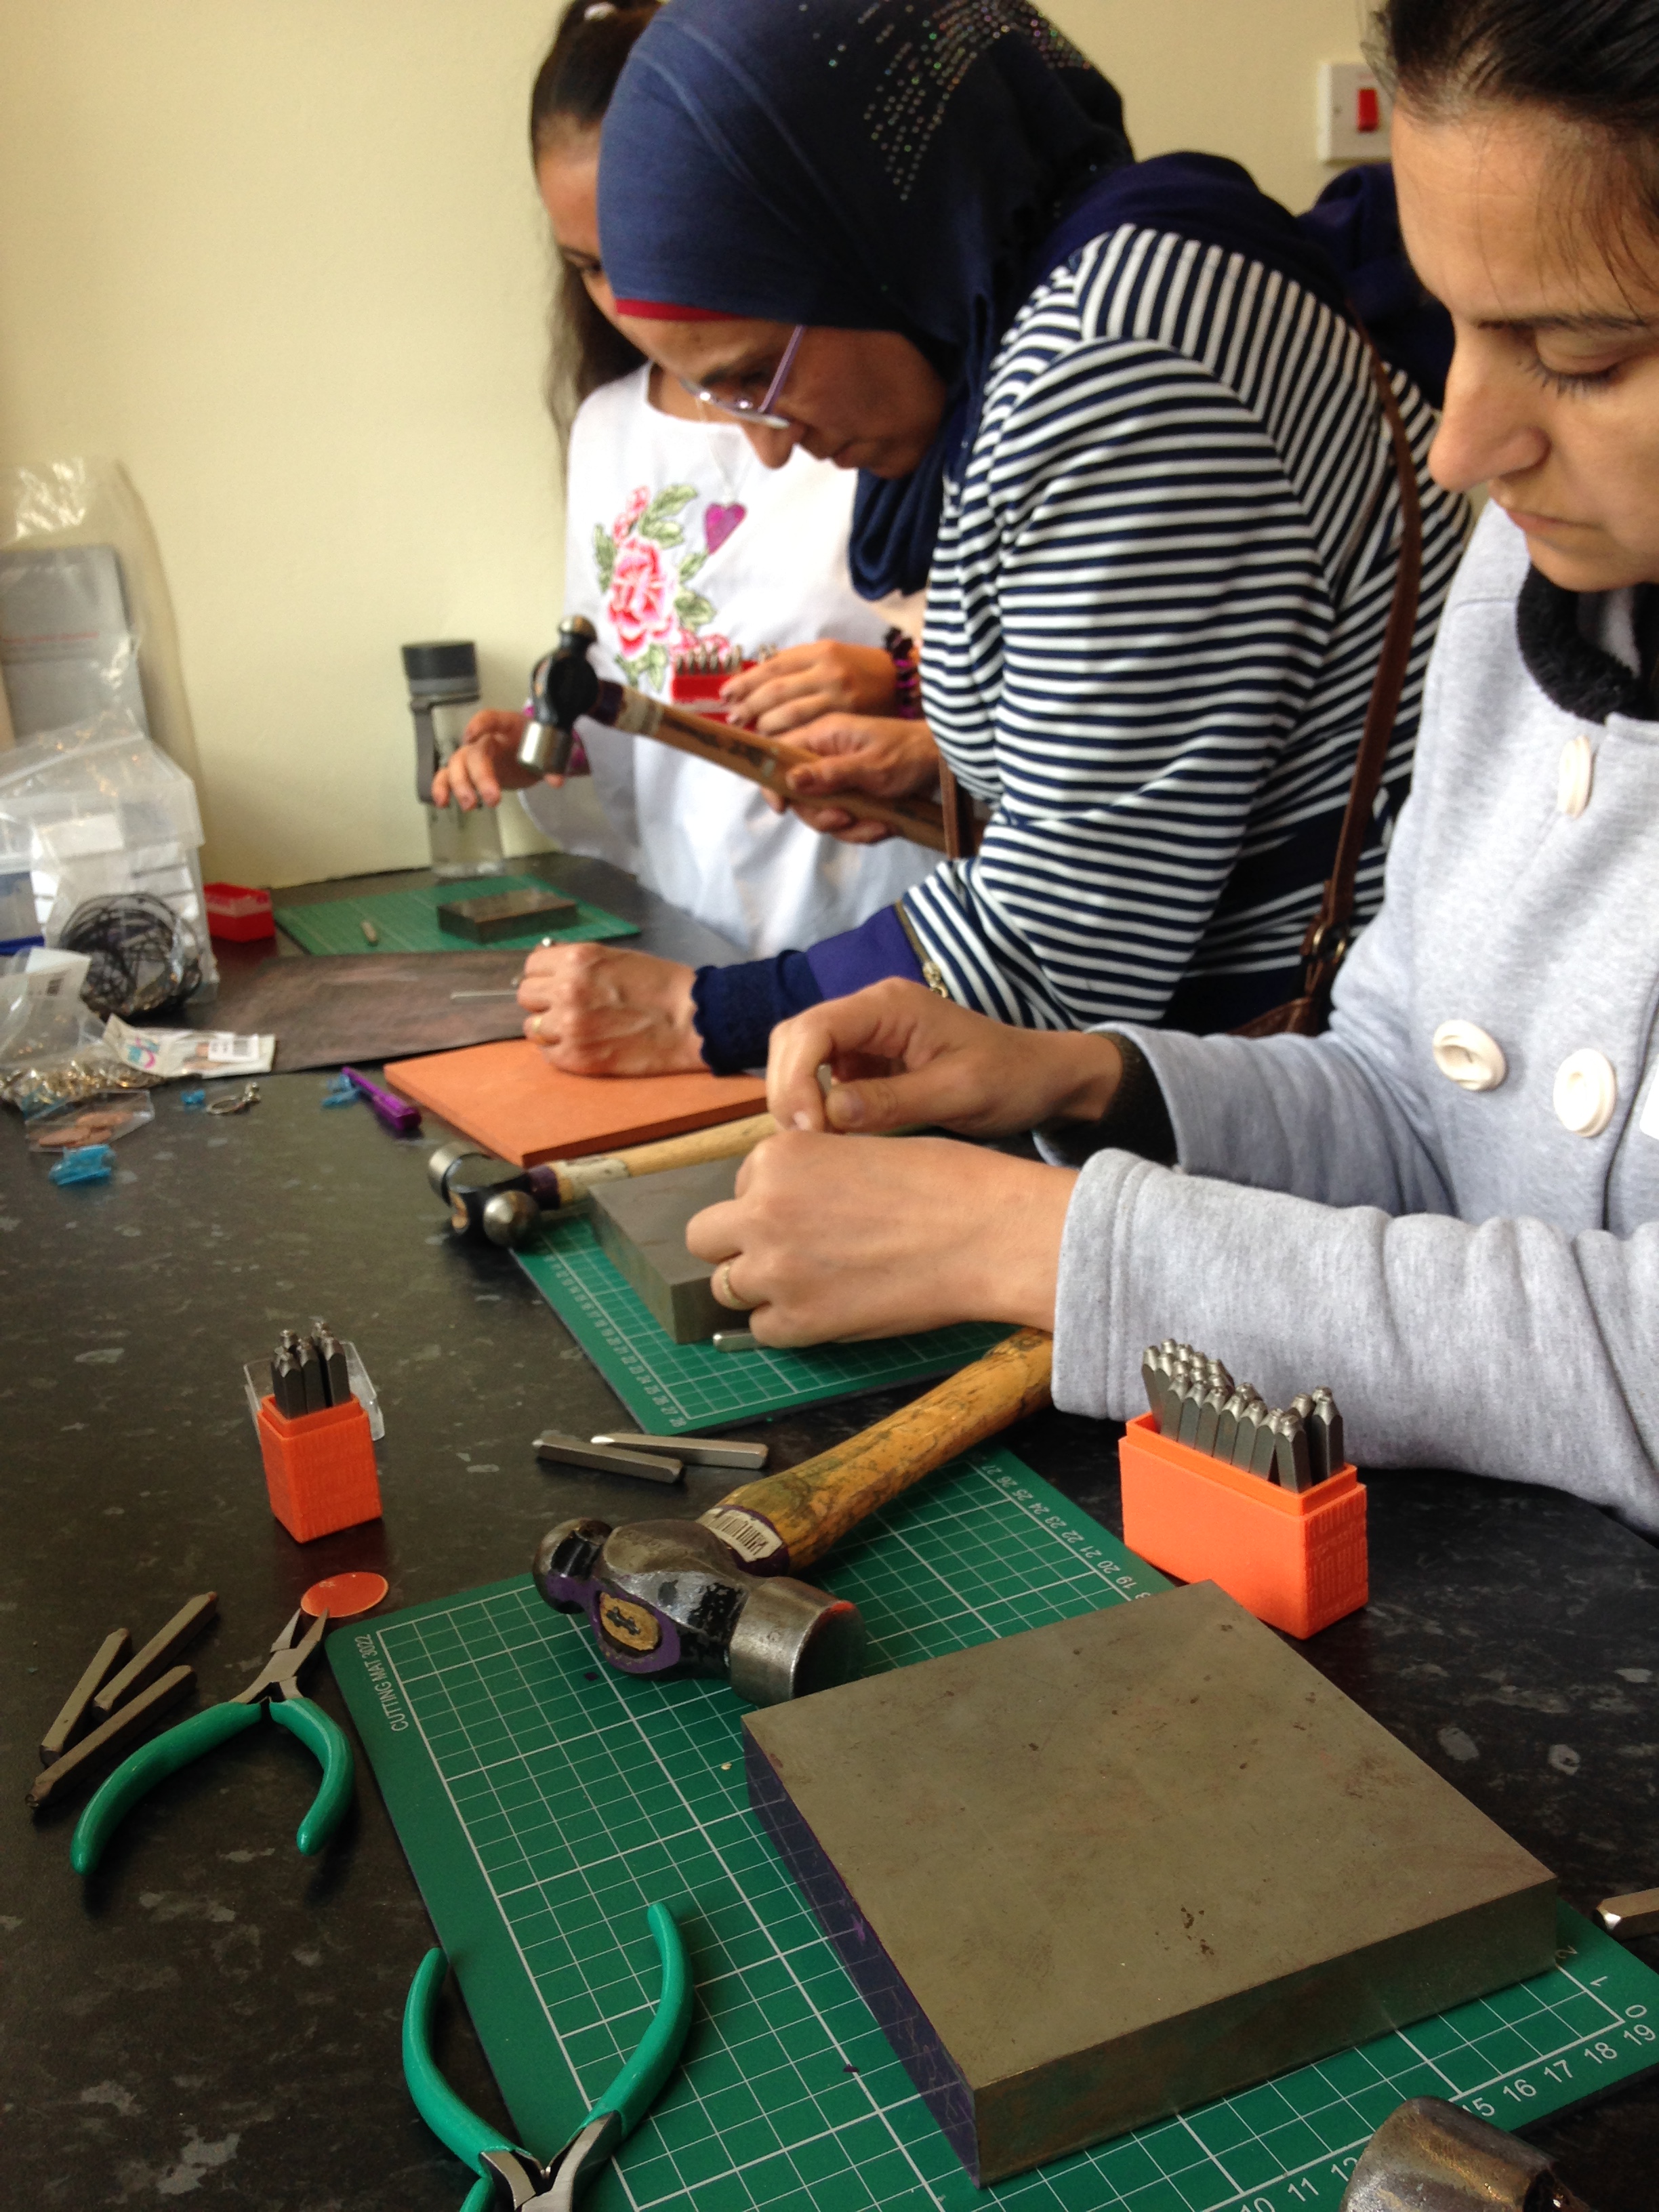 The women are trying out stamping on copper.